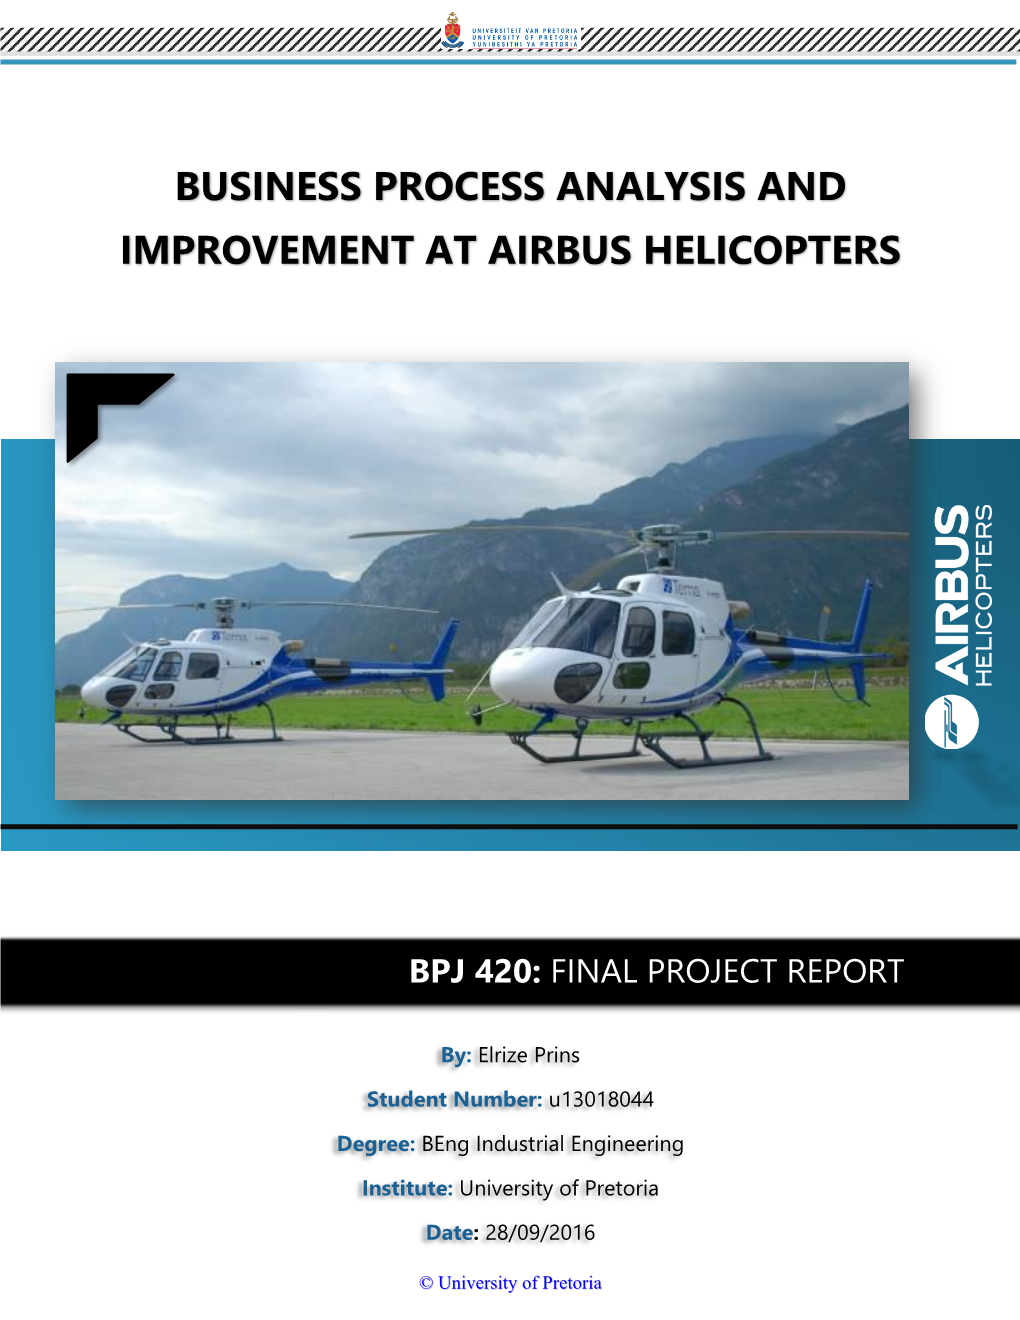 Business Process Analysis and Improvement at Airbus Helicopters